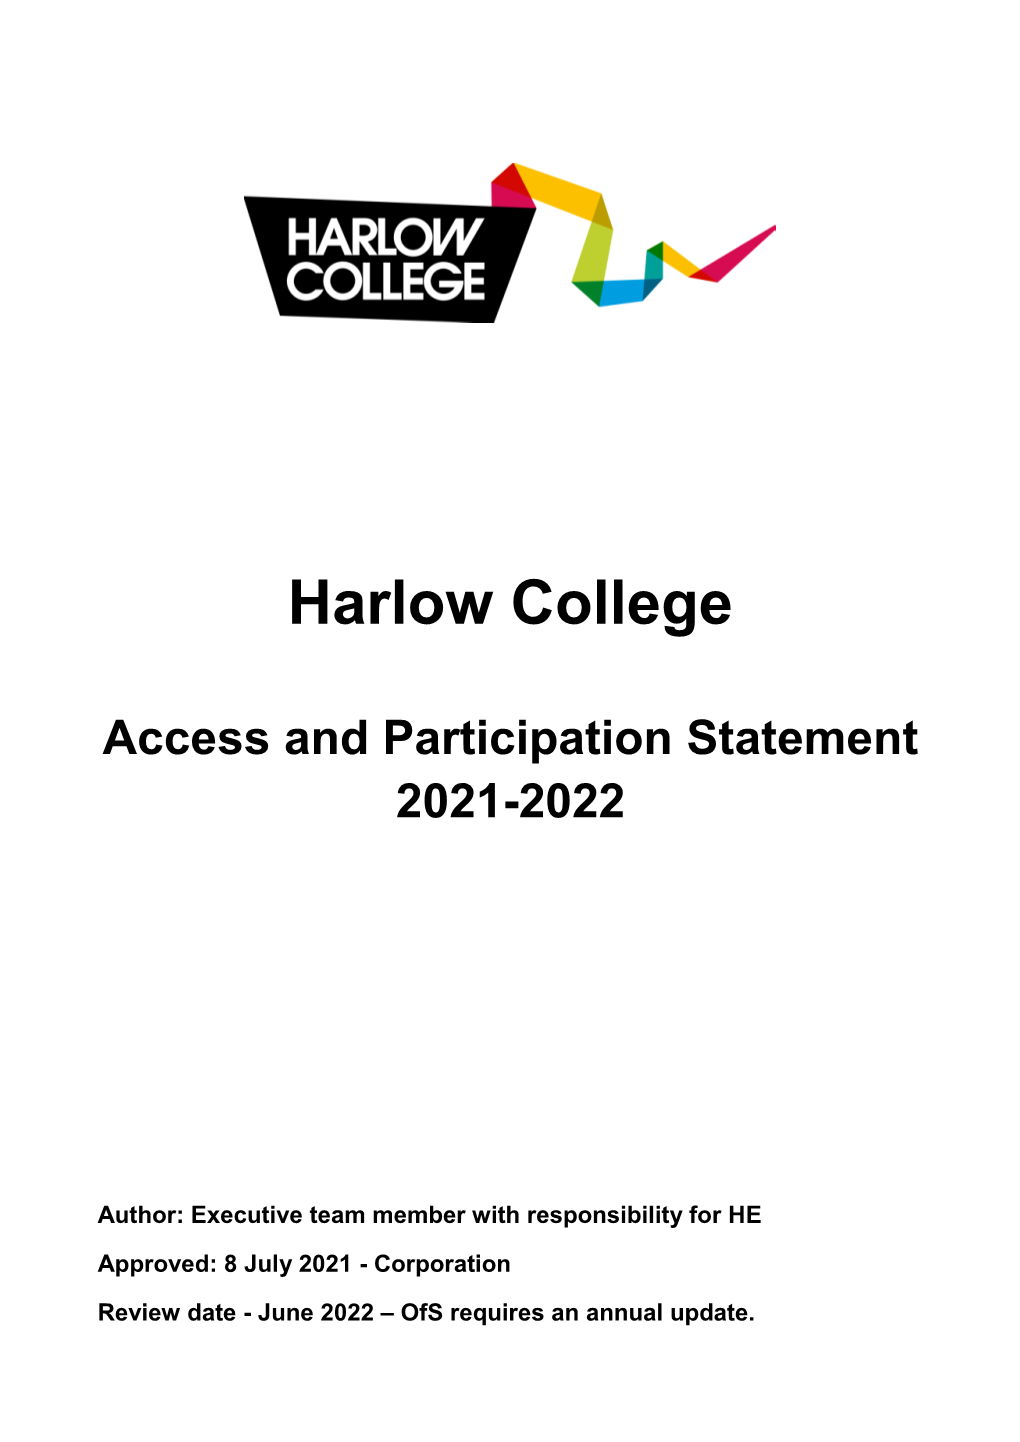 Access and Participation Statement 2021-2022